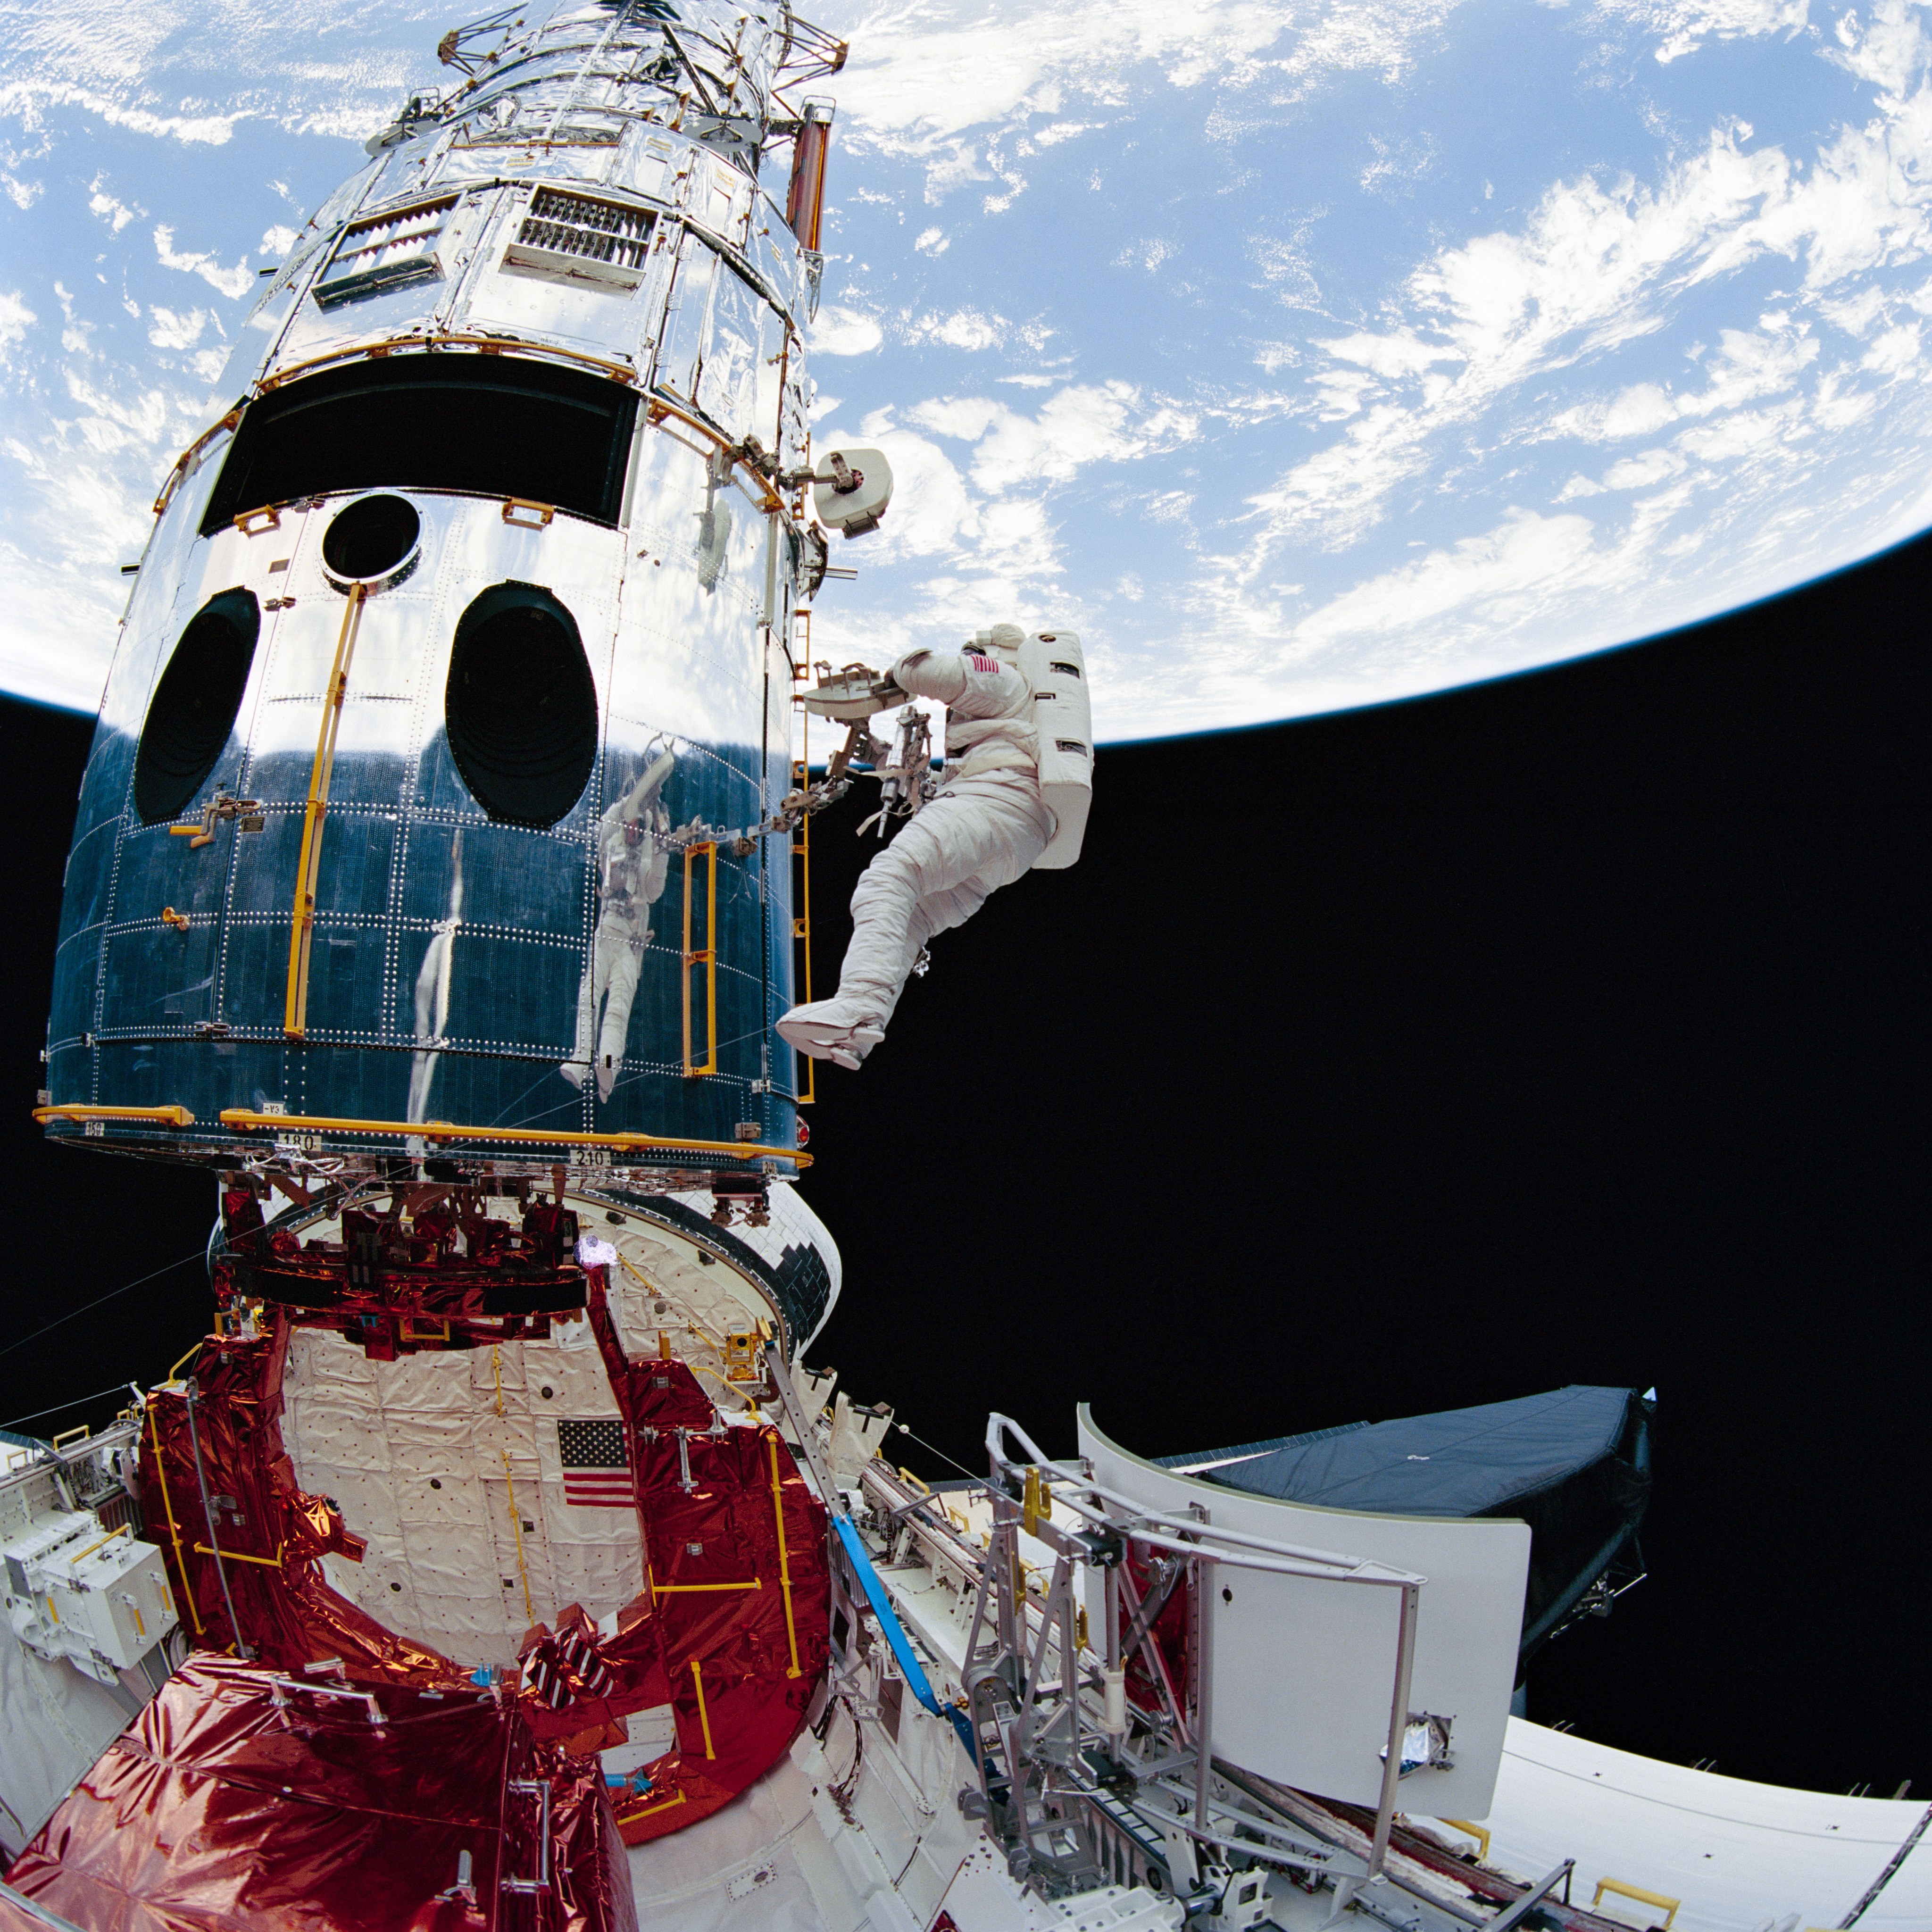 With Earth in the background, an astronaut works on Hubble and is reflected in the shiny surface of the telescope. Below him, the space shuttle's metallic, red-colored Flight Support System helps hold the telescope in position, and the newly removed Wide Field Planetary Camera 1 is stowed temporarily nearby.